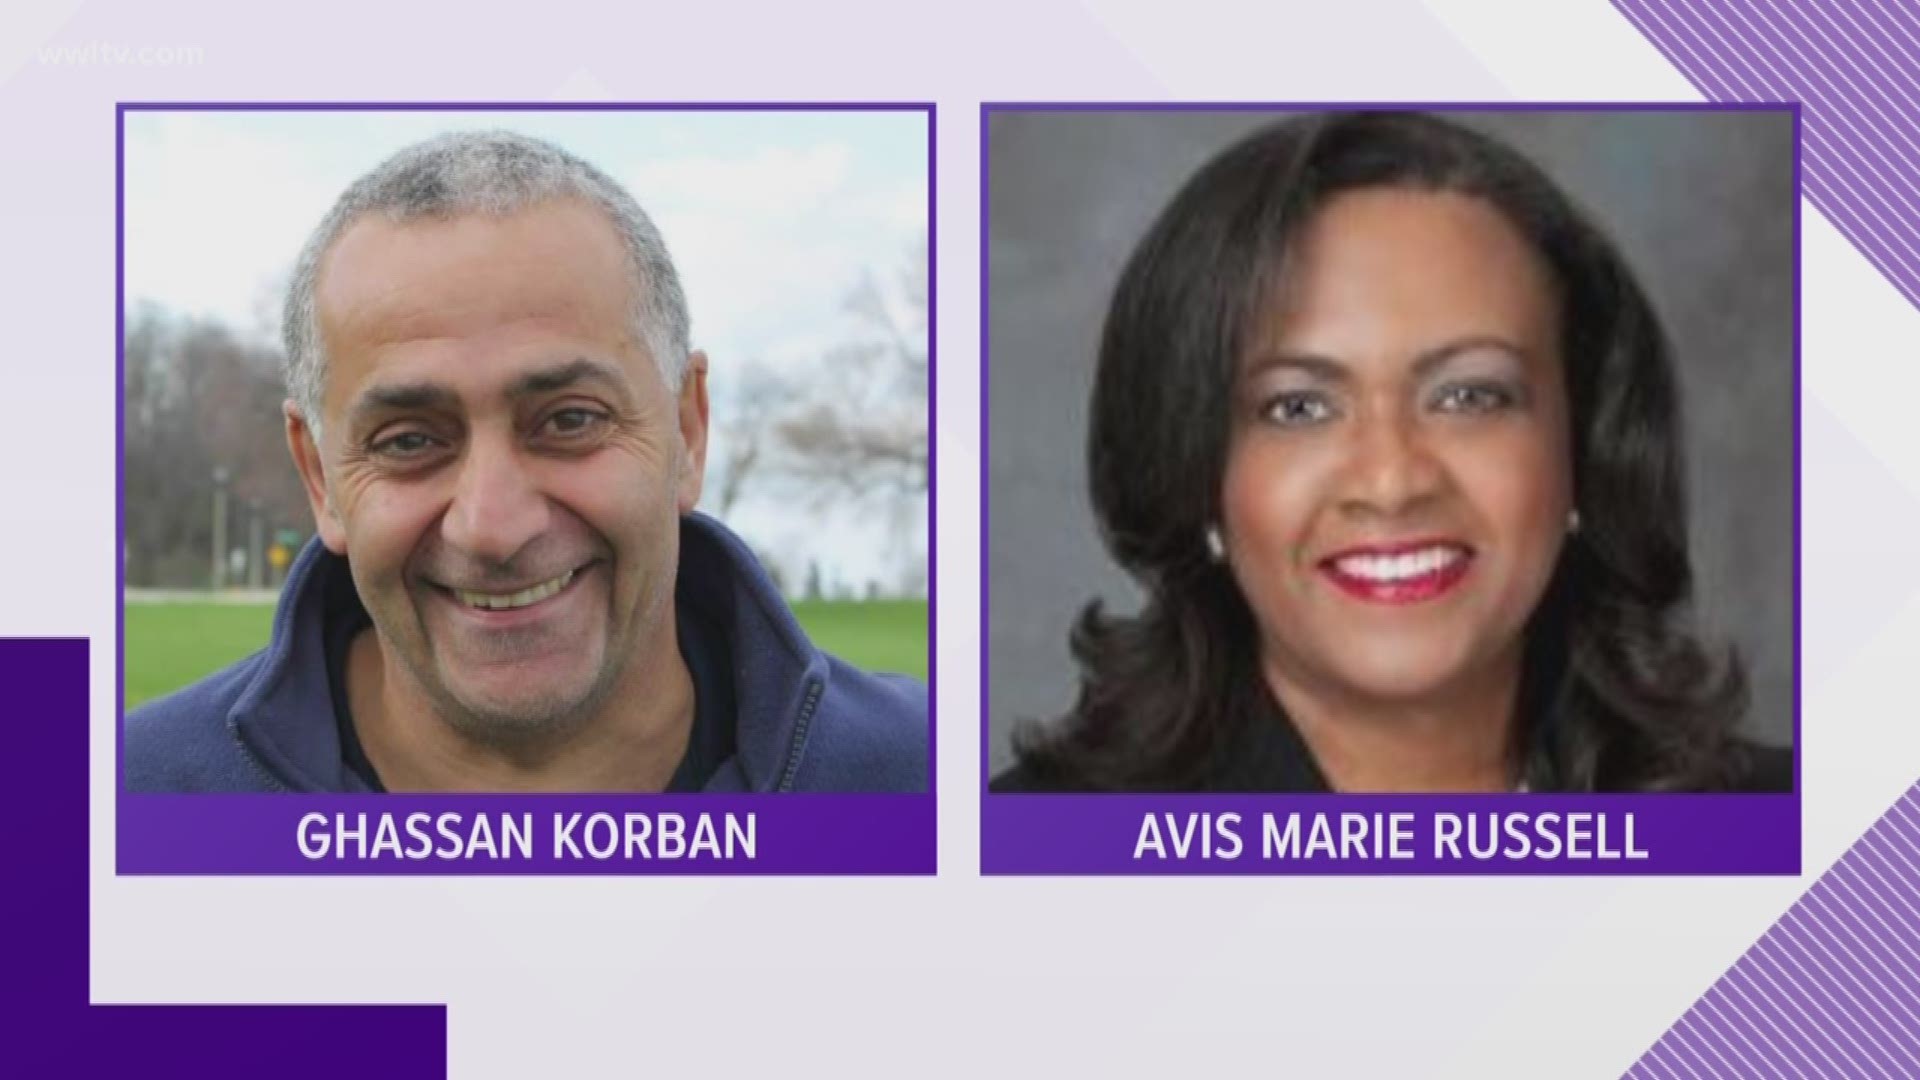 Wednesday, Mayor Cantrell will pick between Ghassan Korban or Avis Marie Russell as the head of the S&WB. 